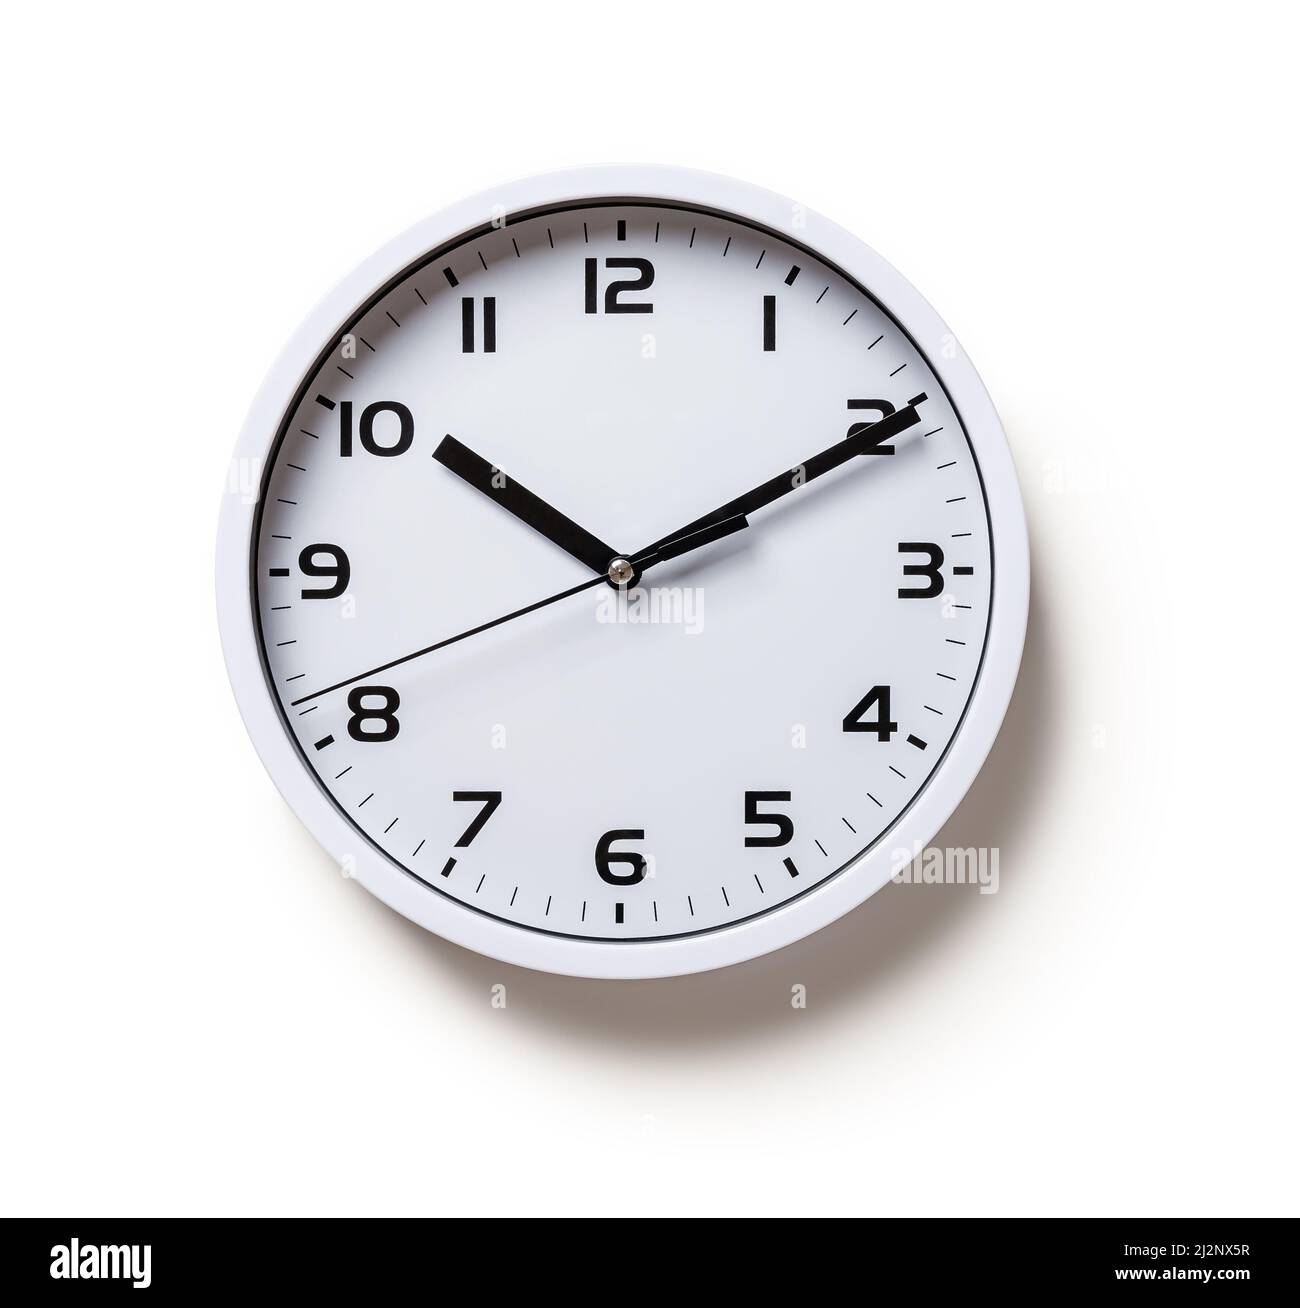 Wall clock isolated on a white background. Round white clock with black hands cutout. Ten minutes past ten. Time control, time measuring  concept. Stock Photo